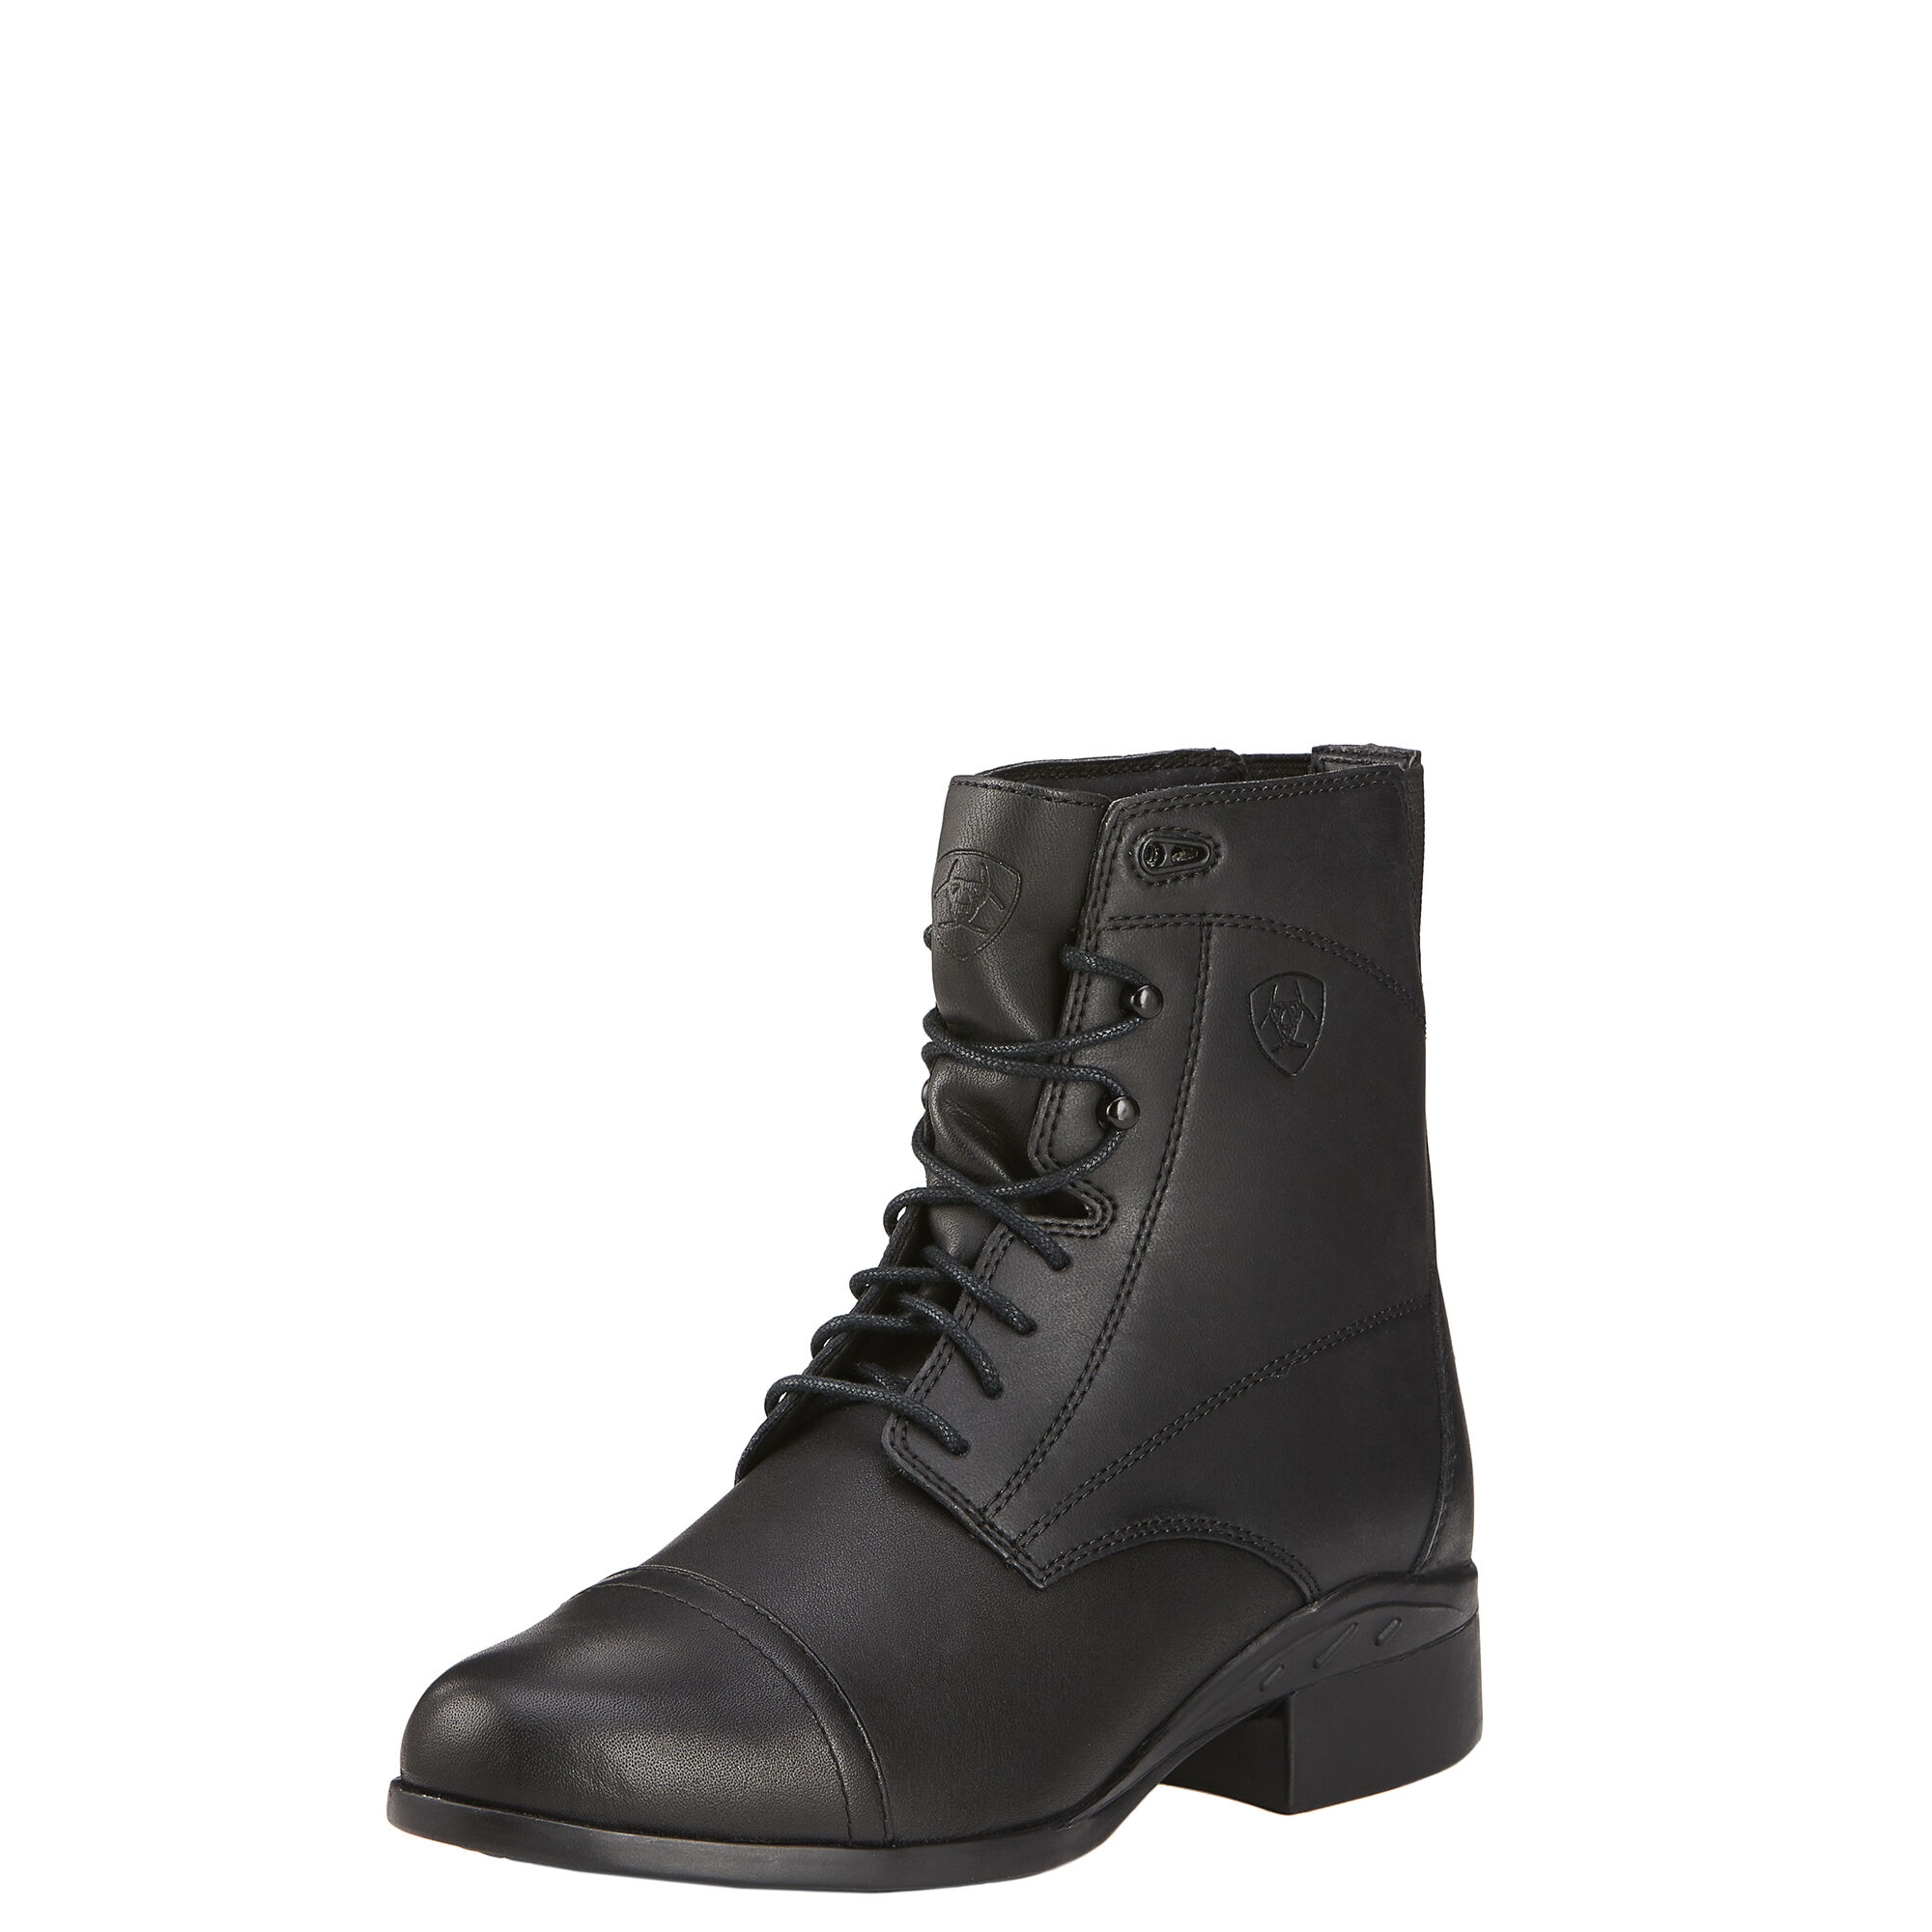 Women's Scout Paddock Boots in Black Leather  by Ariat